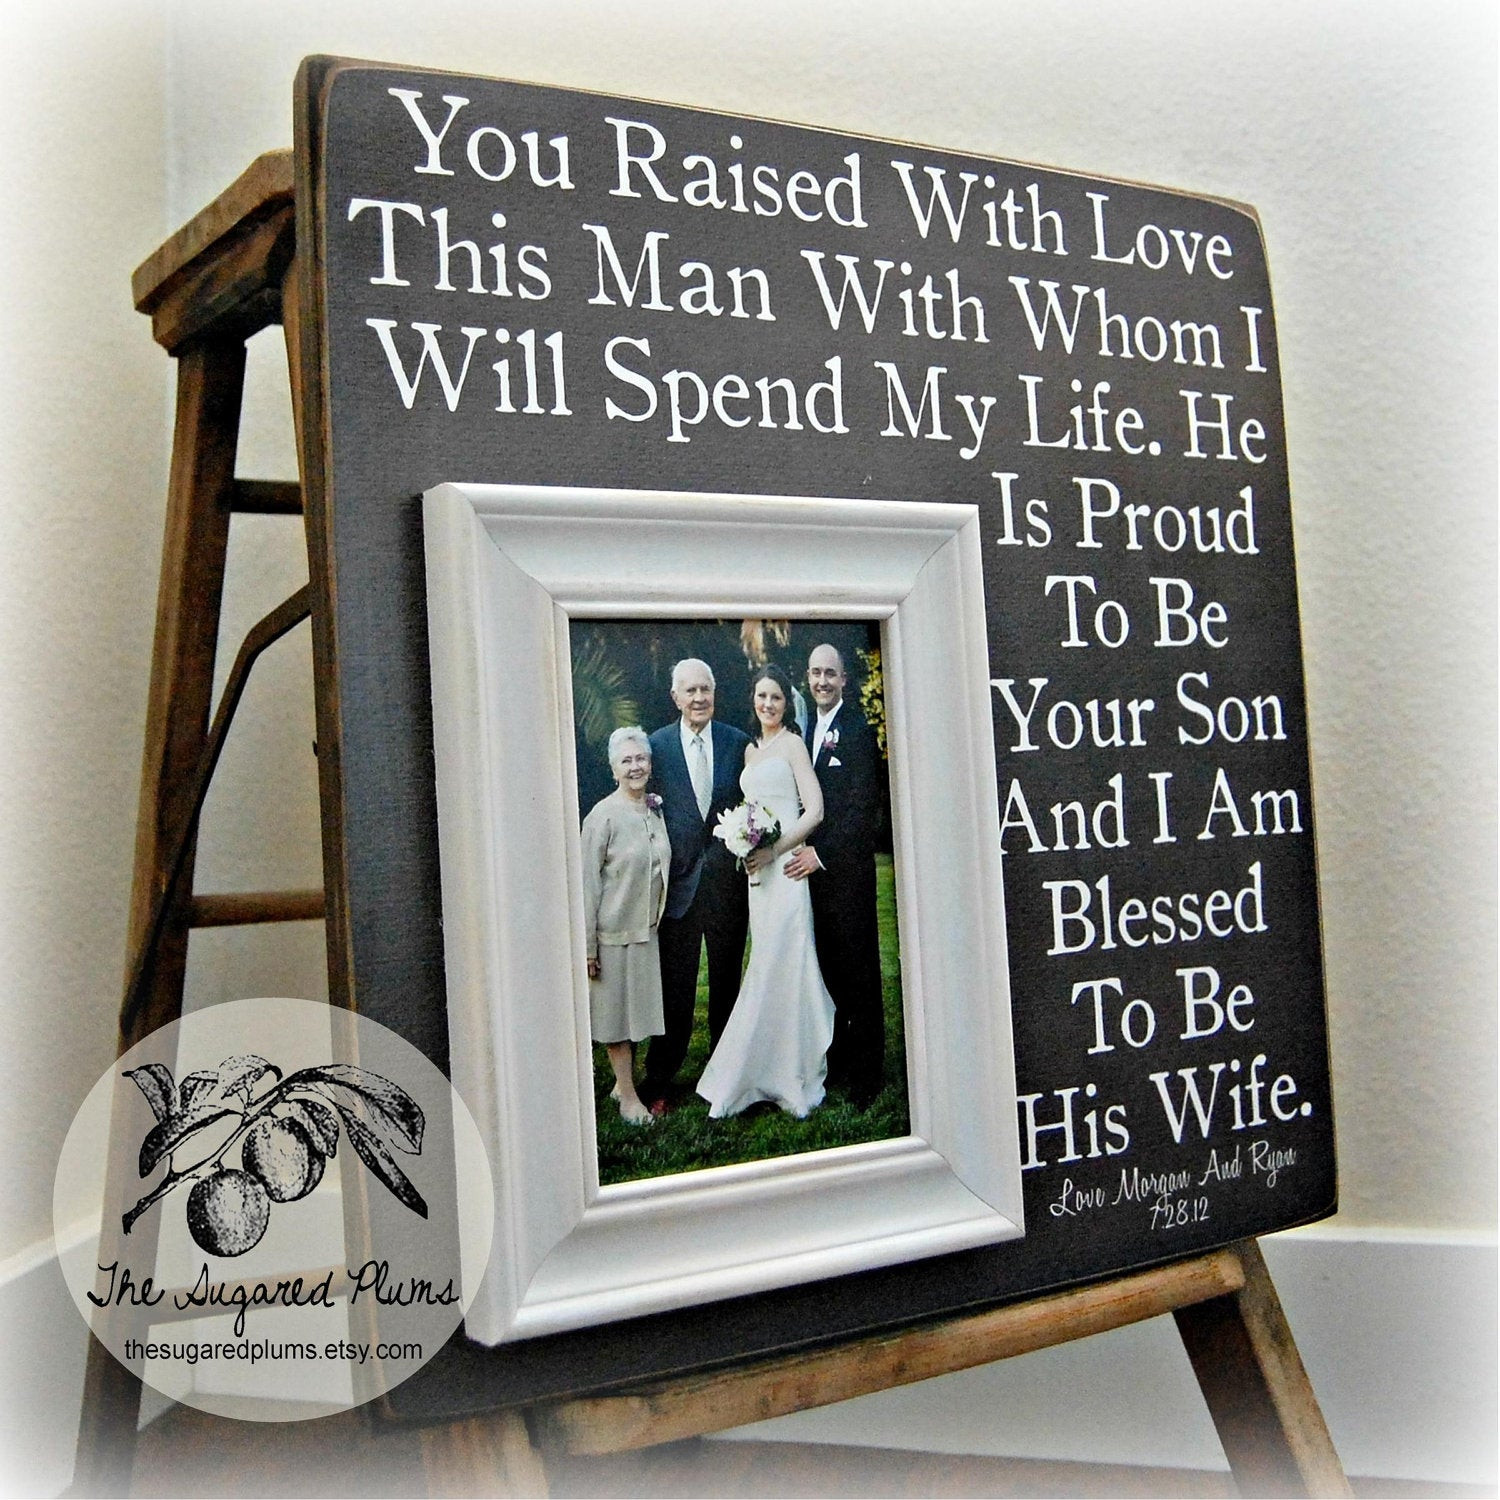 Mother Of The Groom Gift Ideas From Bride
 Parents of the Groom Gift Mother of the Groom by